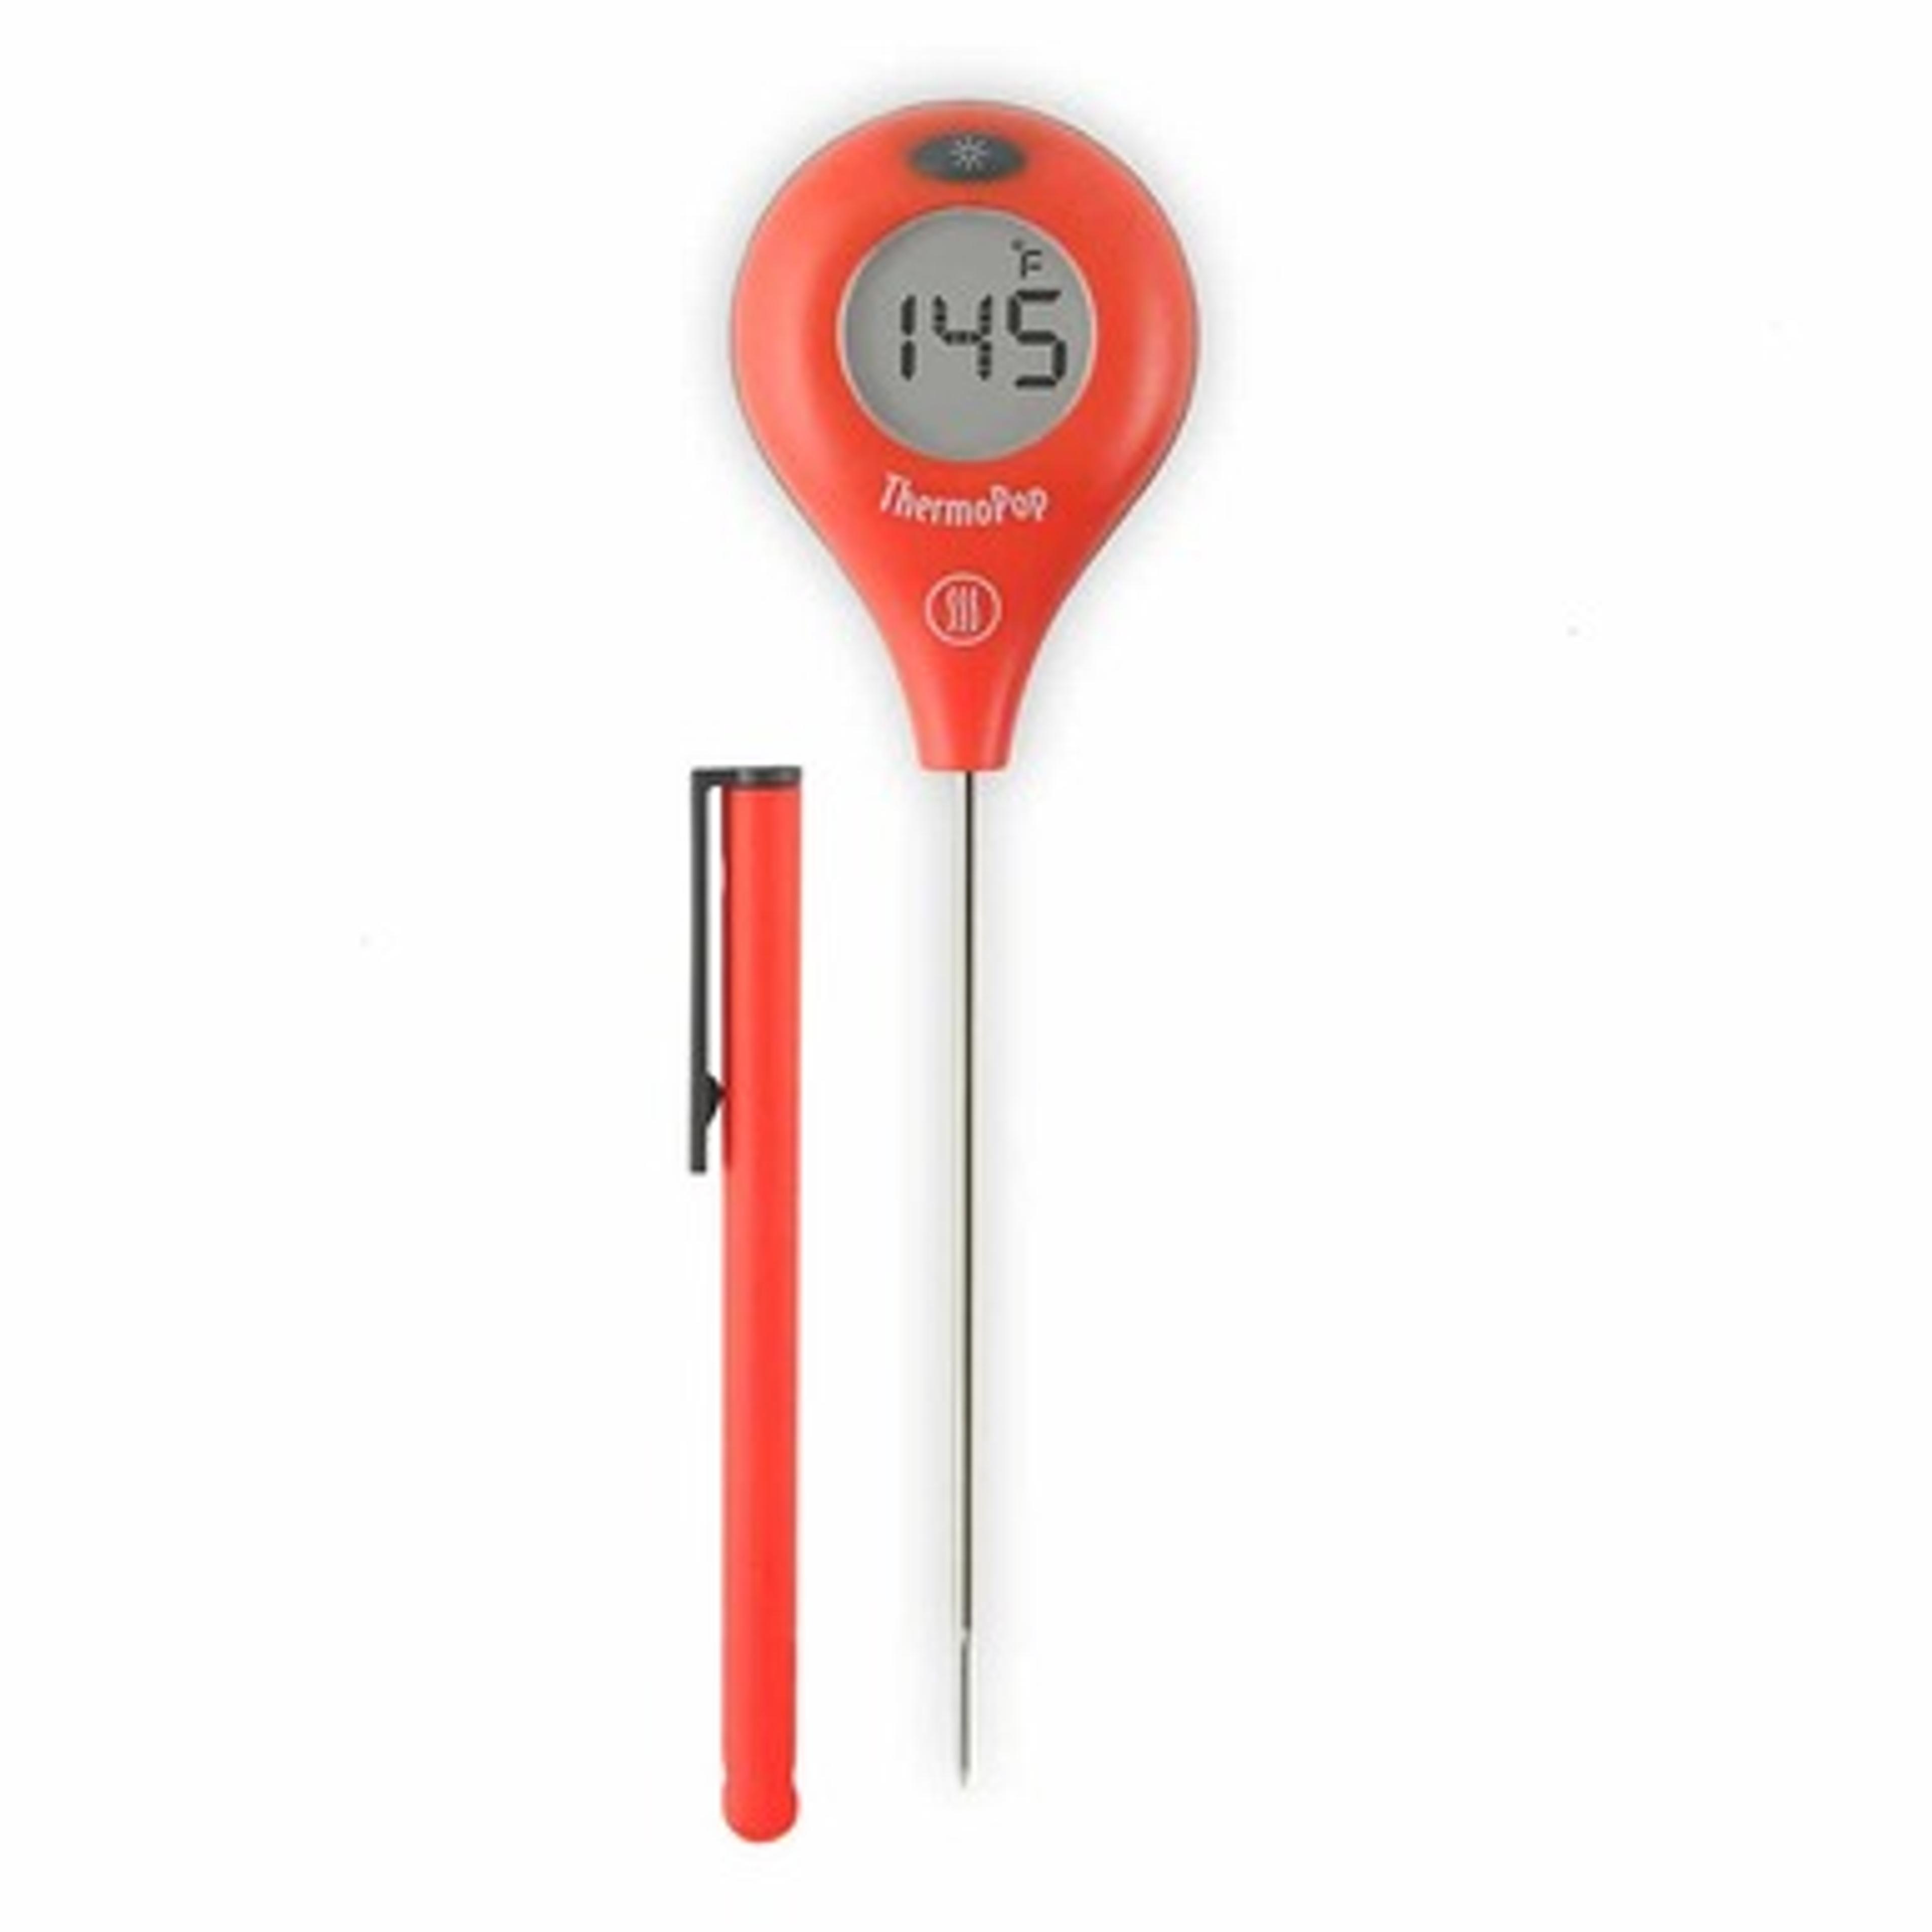 ThermoPop Digital Pocket Thermometer from ThermoWorks